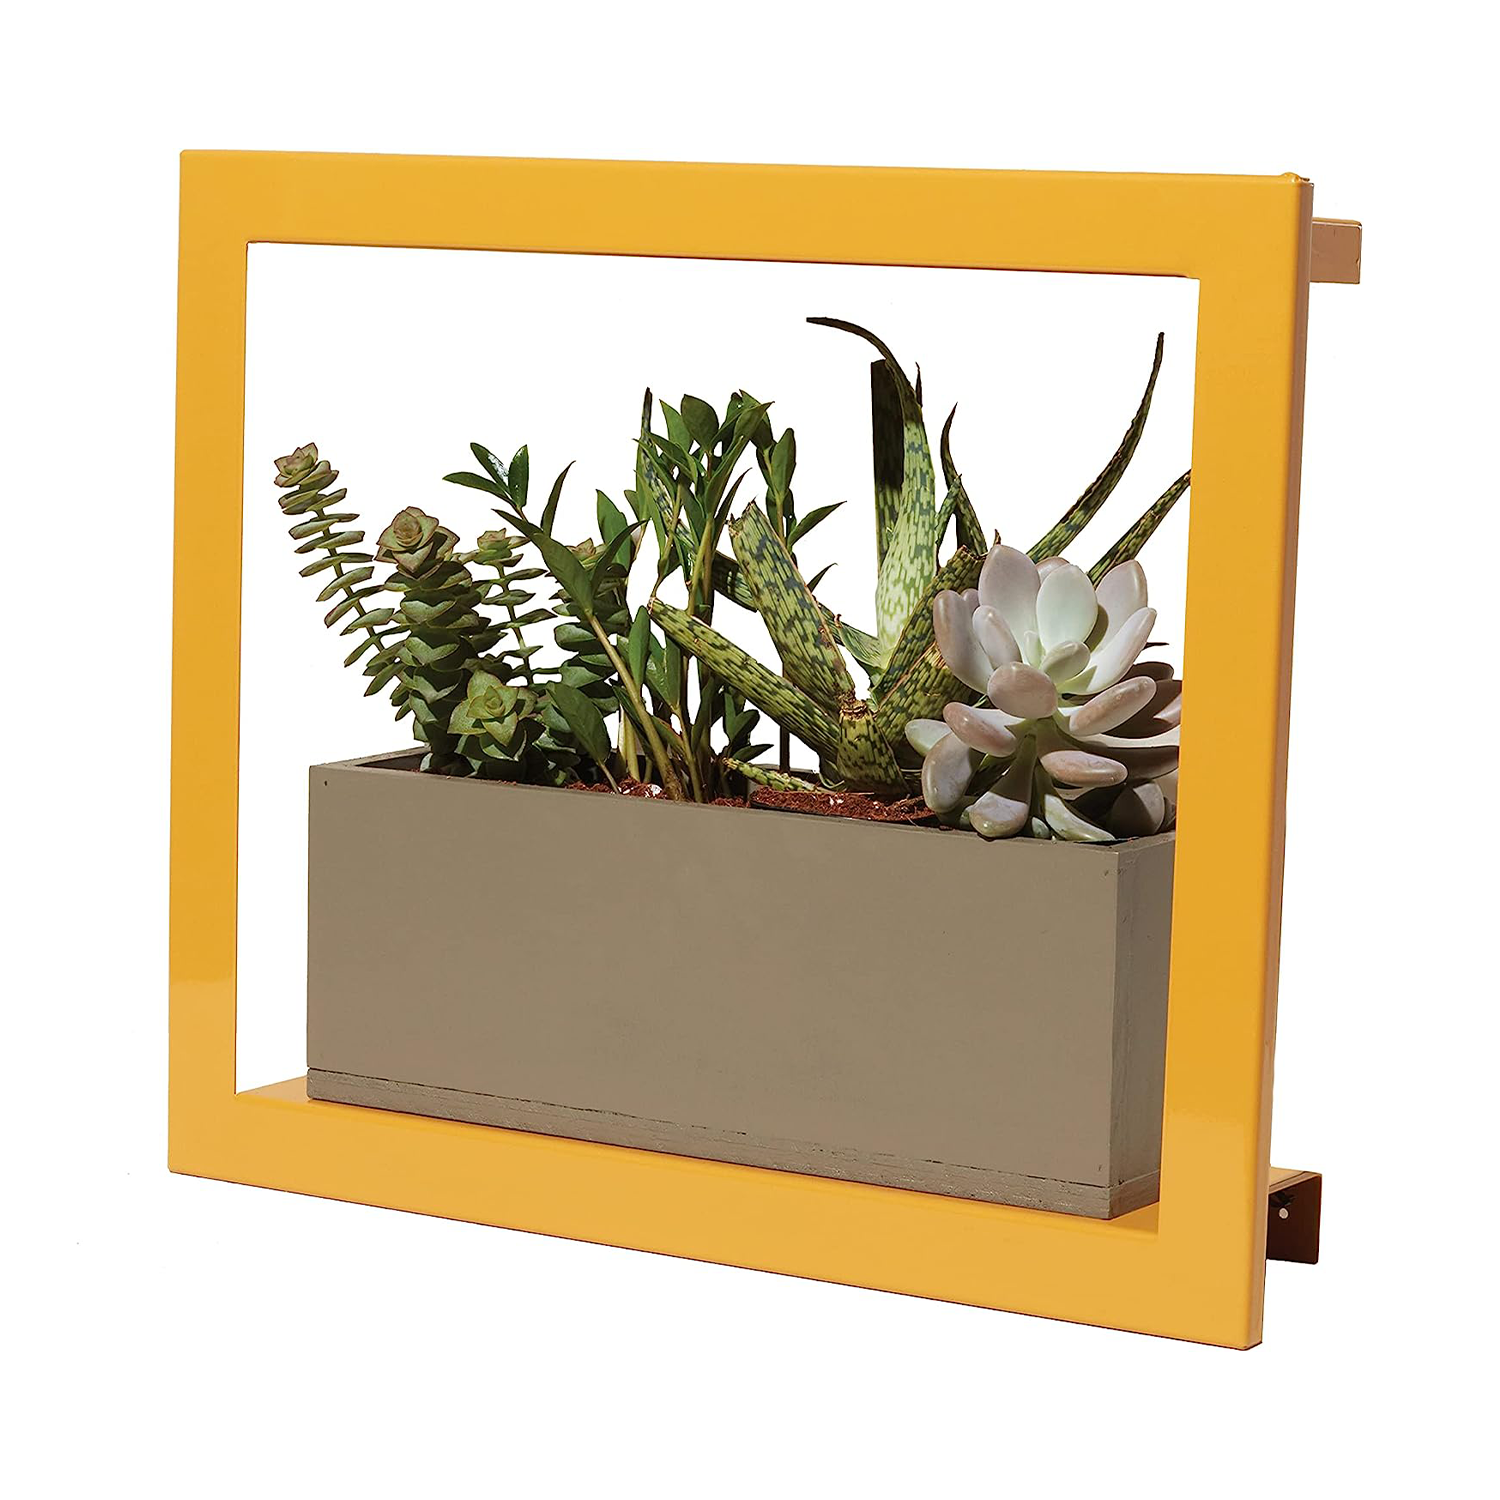 Modern Sprout Grow Shelf in yellow